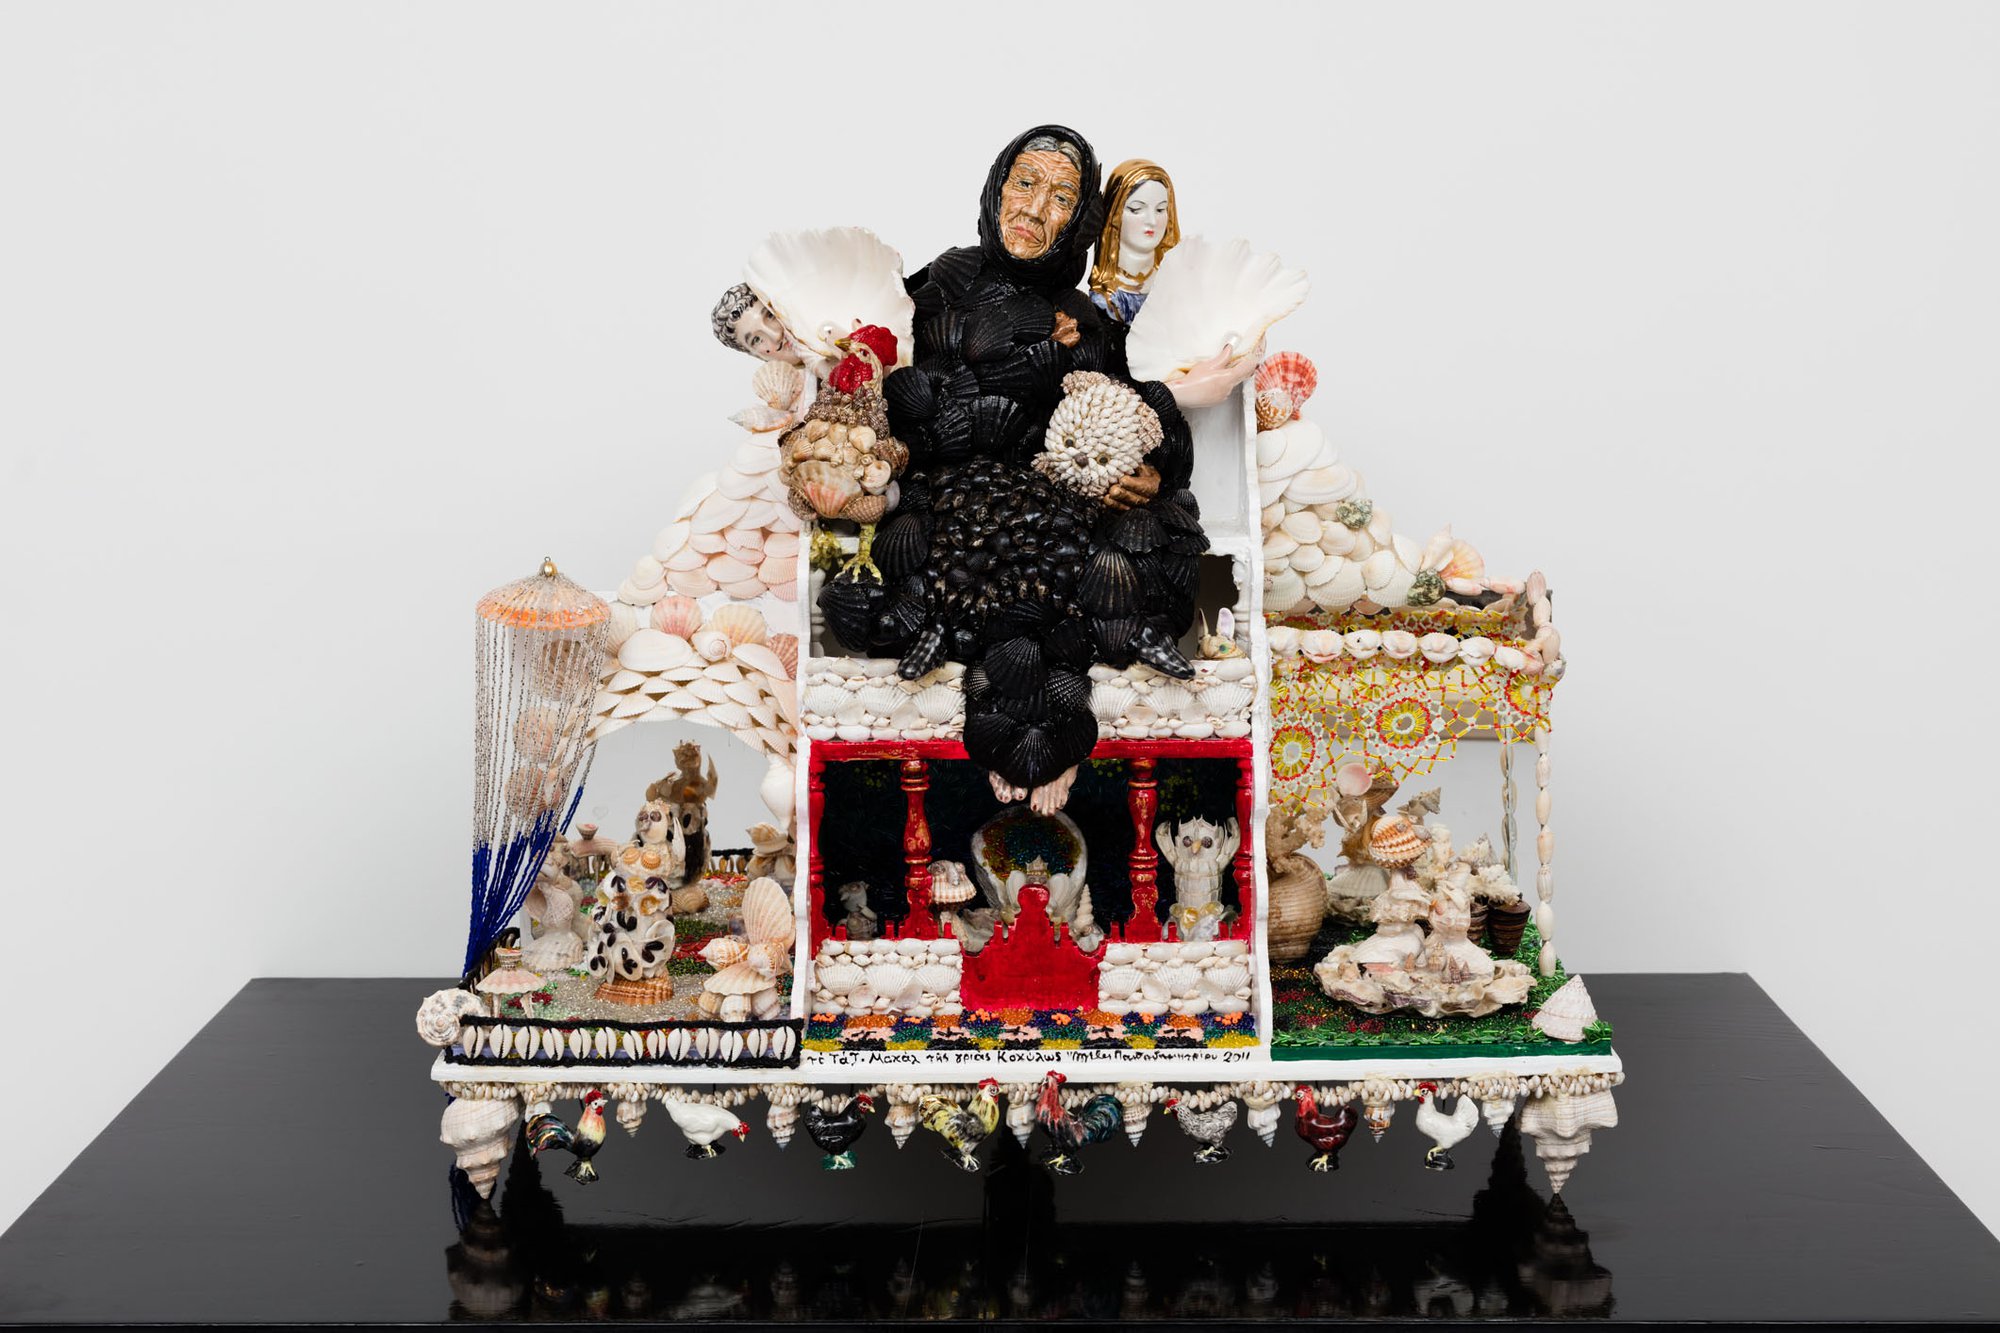 Angelos Papadimitriou, The Taj Mahal of the Old Lady with the Shells, porcelain, shells, beads, wood, 70 x 75 x 25 cm (27 1/2 x 29 1/2 x 9 7/8 in), 2011